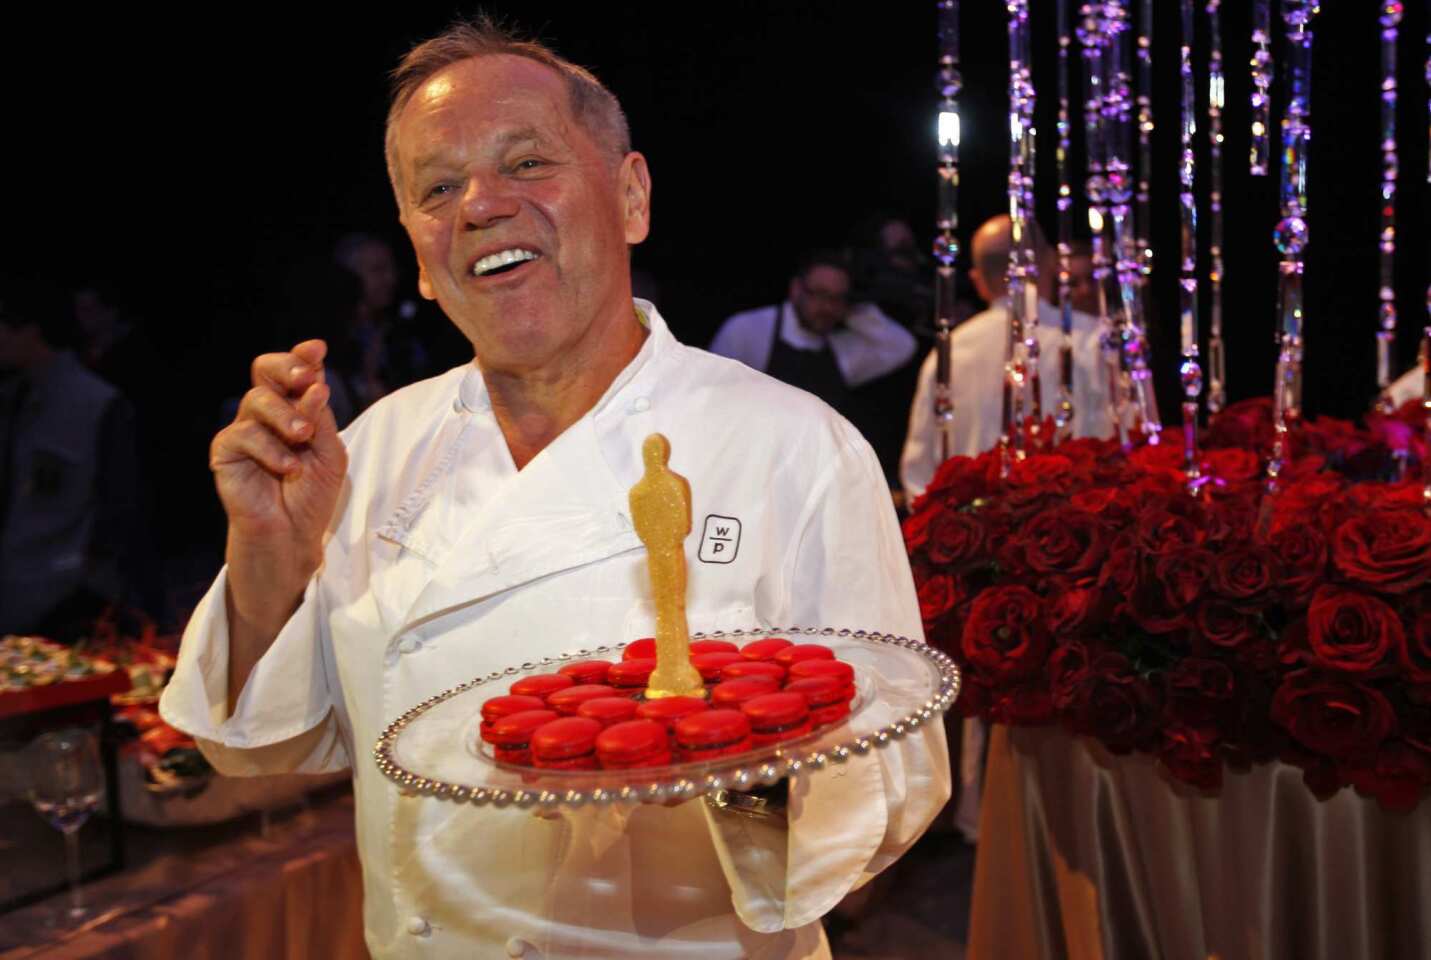 Master Chef Wolfgang Puck poses during the preview of decor and food that will be served at this year's Oscars Governors Ball, the celebration immediately following the 84th Academy Awards.